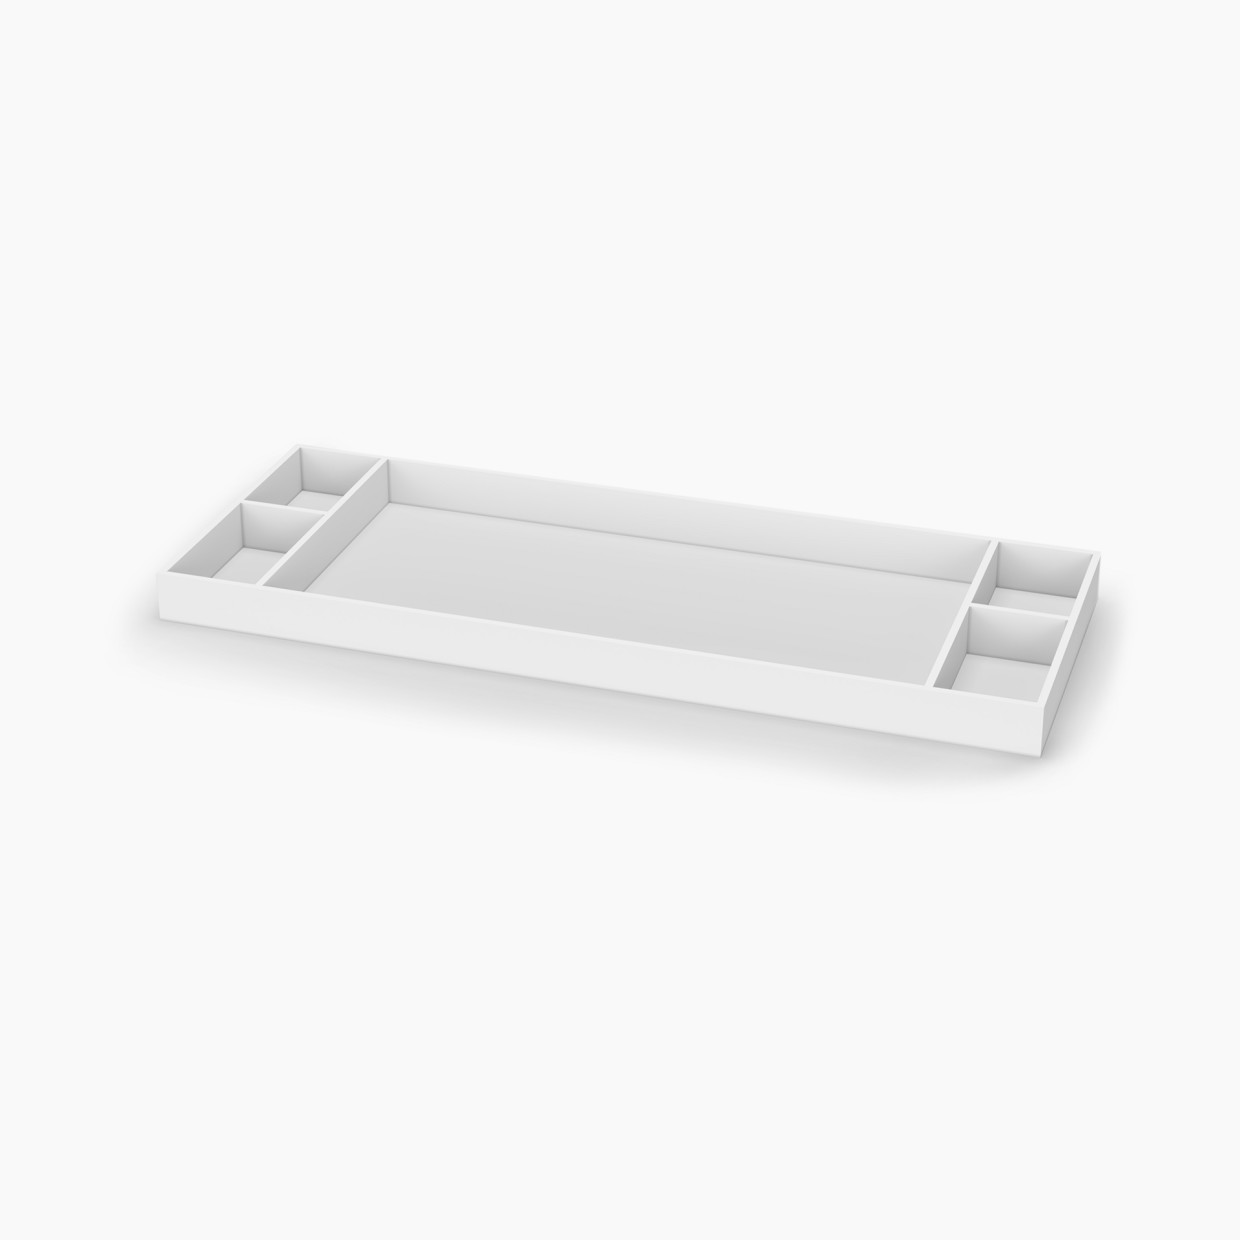 dadada Removable Changing Tray for the Boston Dresser - White.